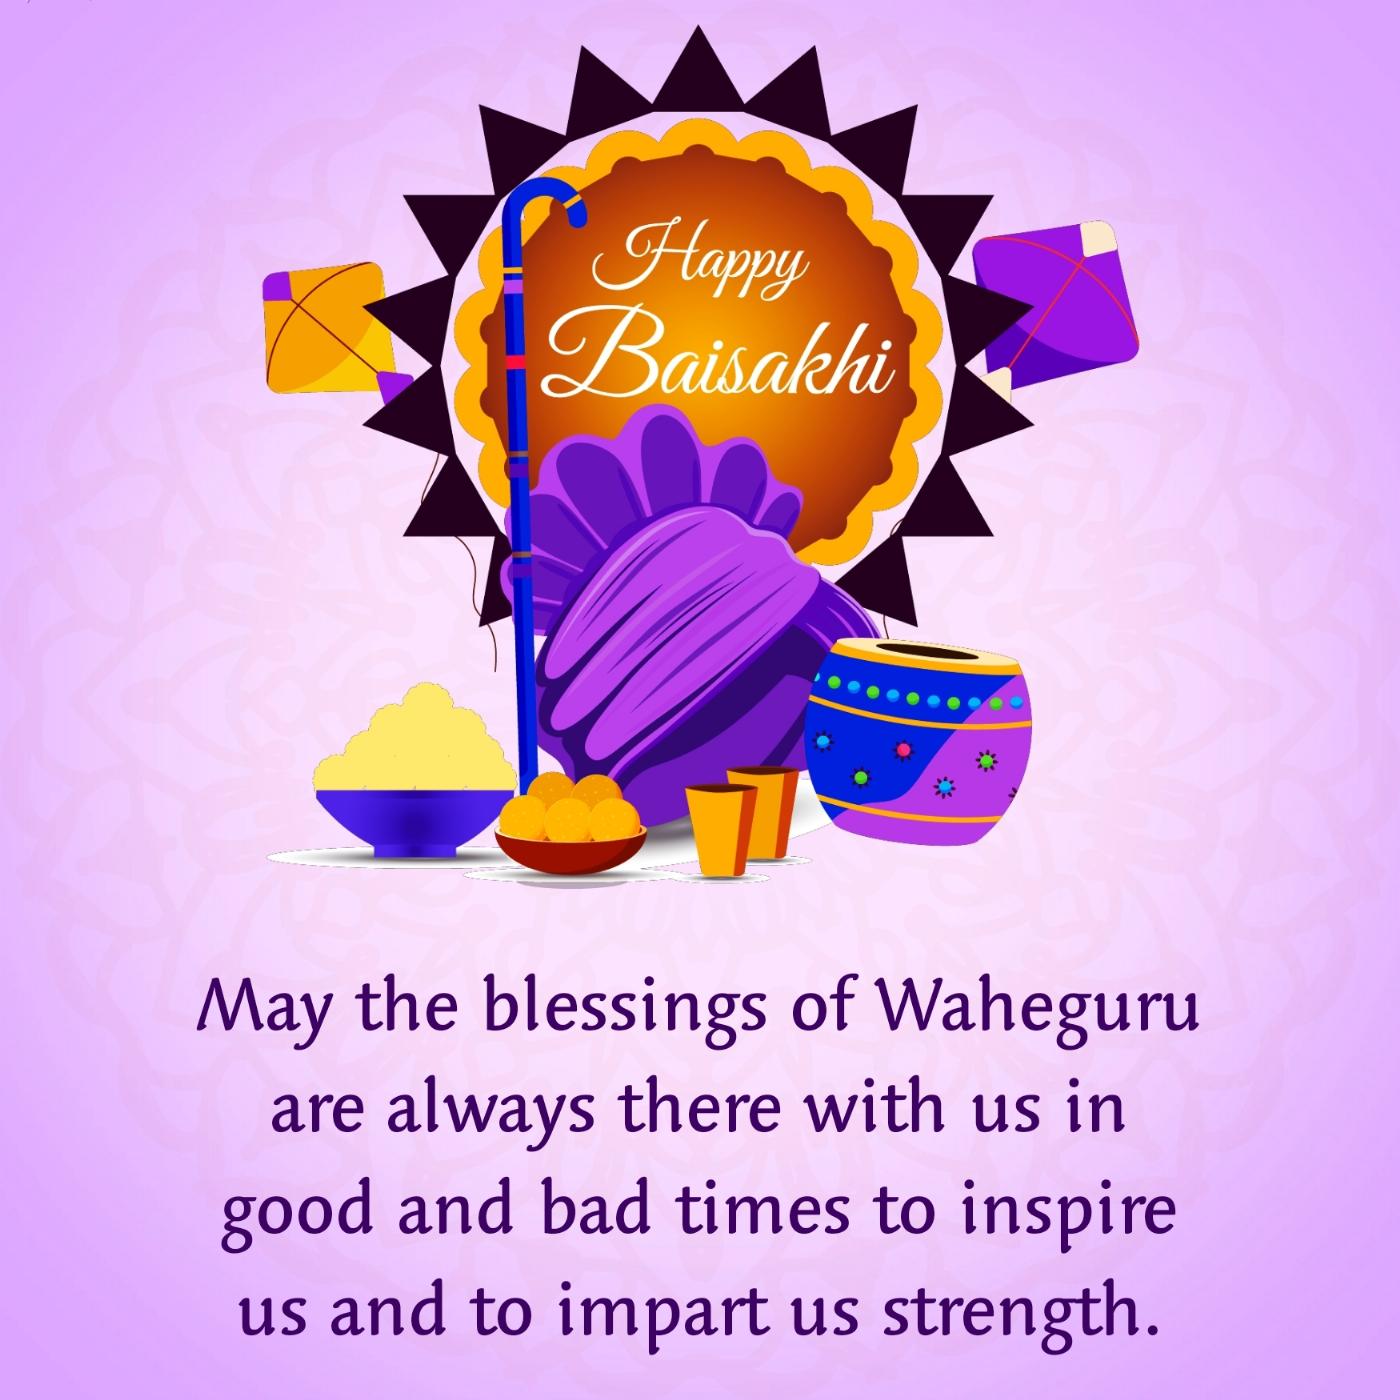 May the blessings of Waheguru are always there with us